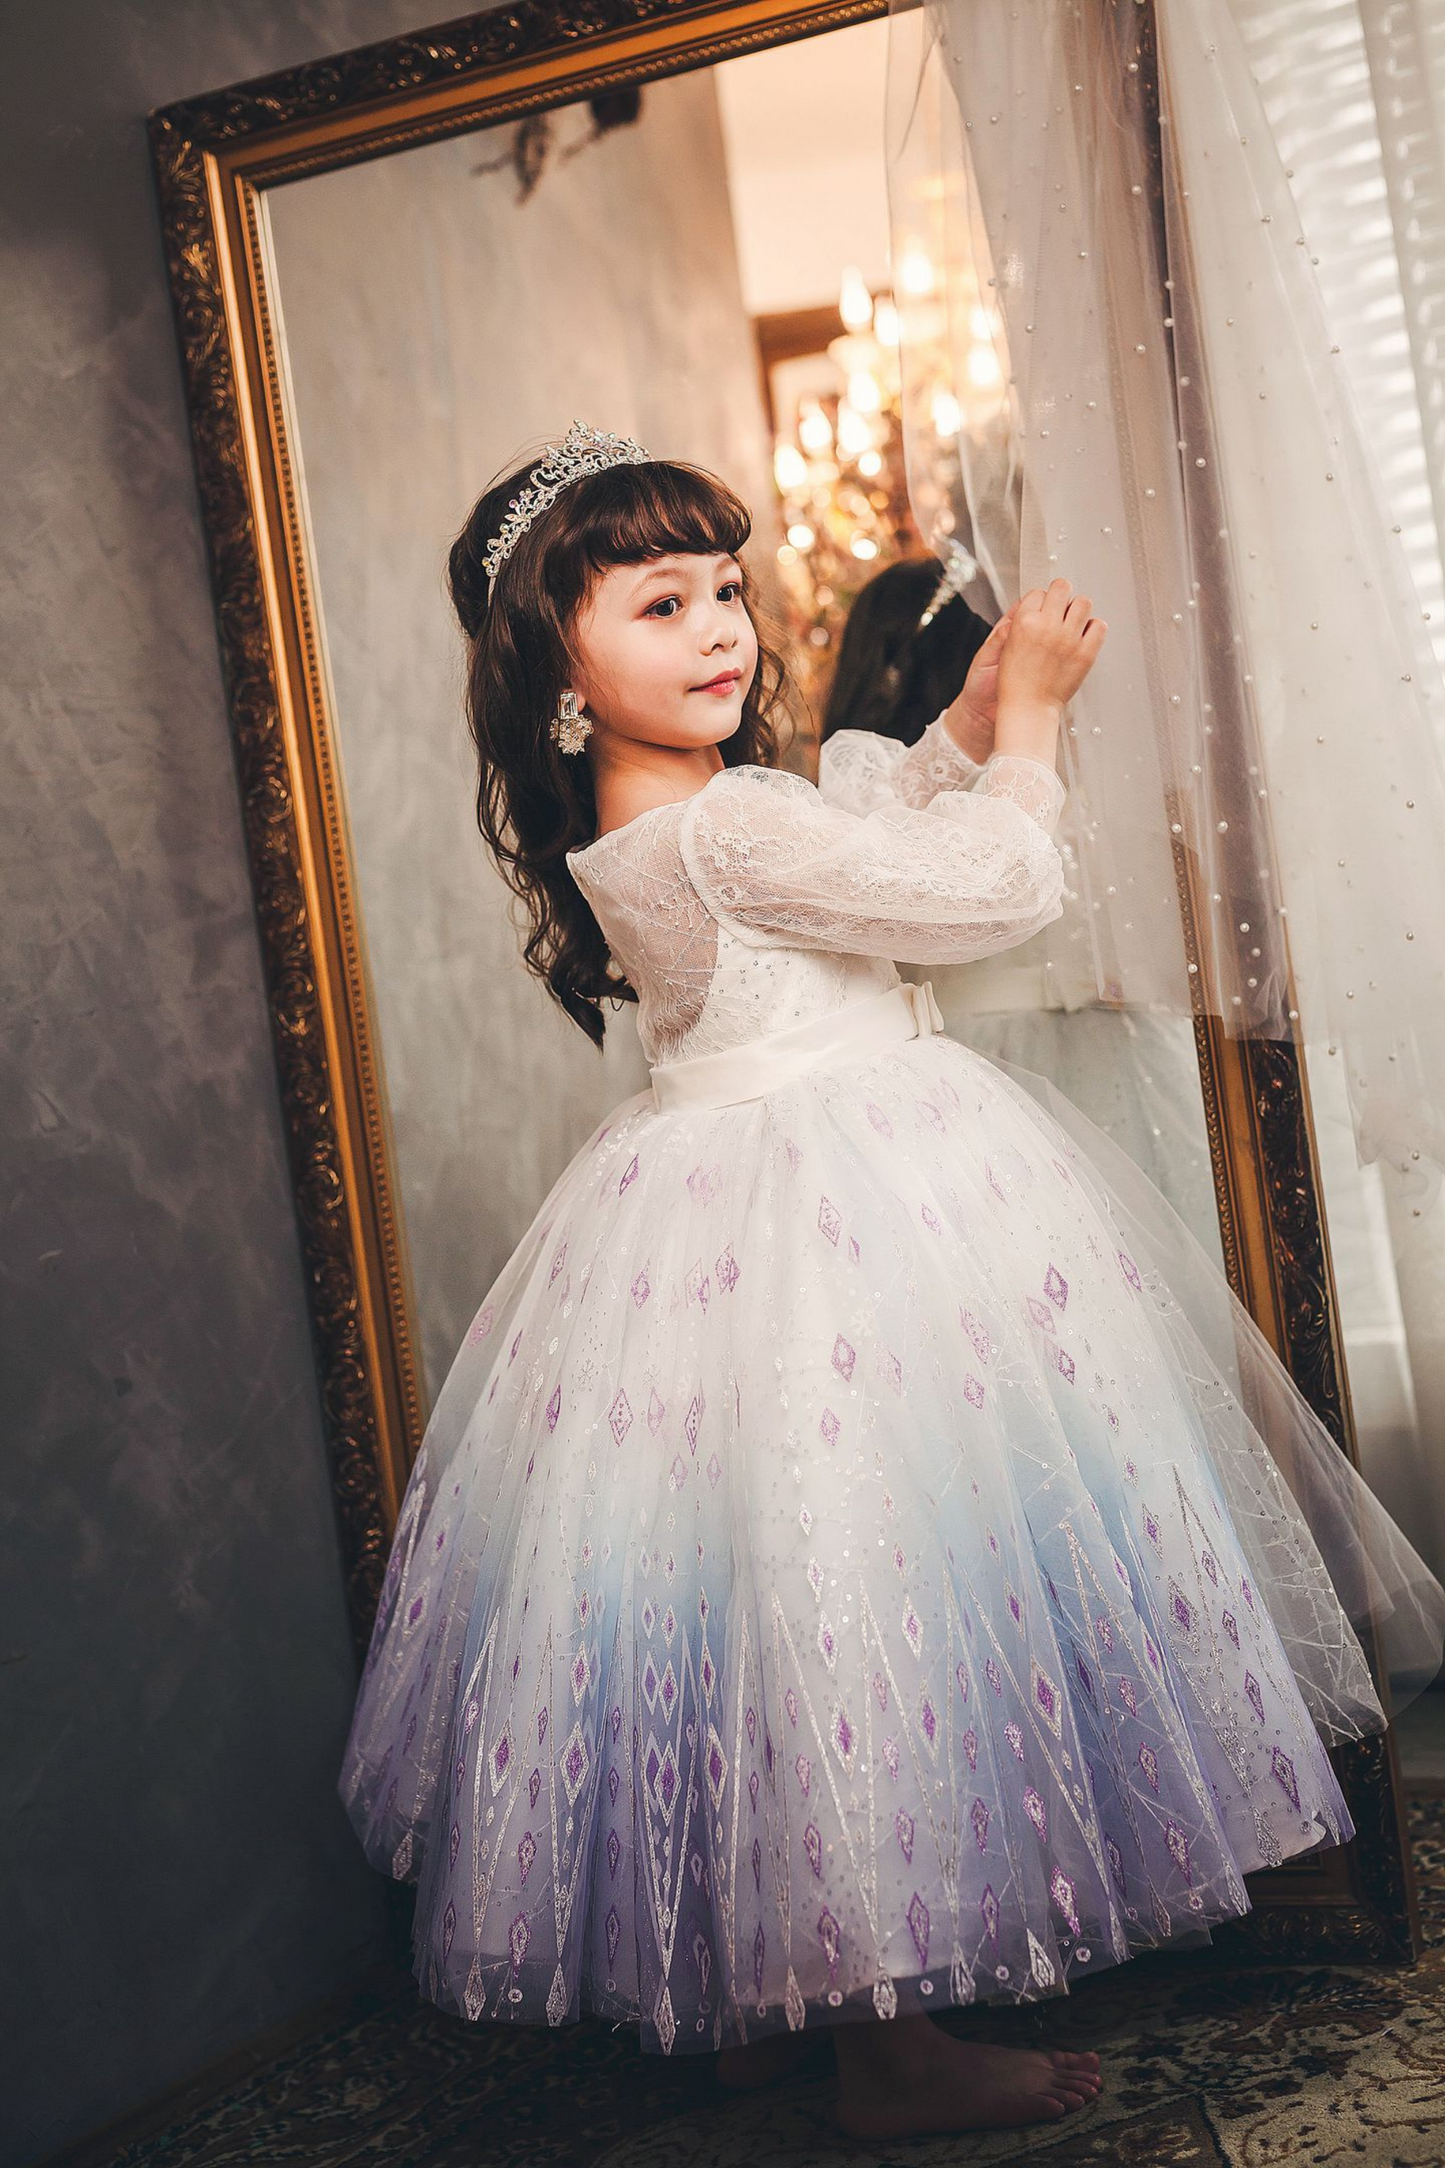 Elsa Ombre Ice Queen Gown with Pearl-embellished Cape